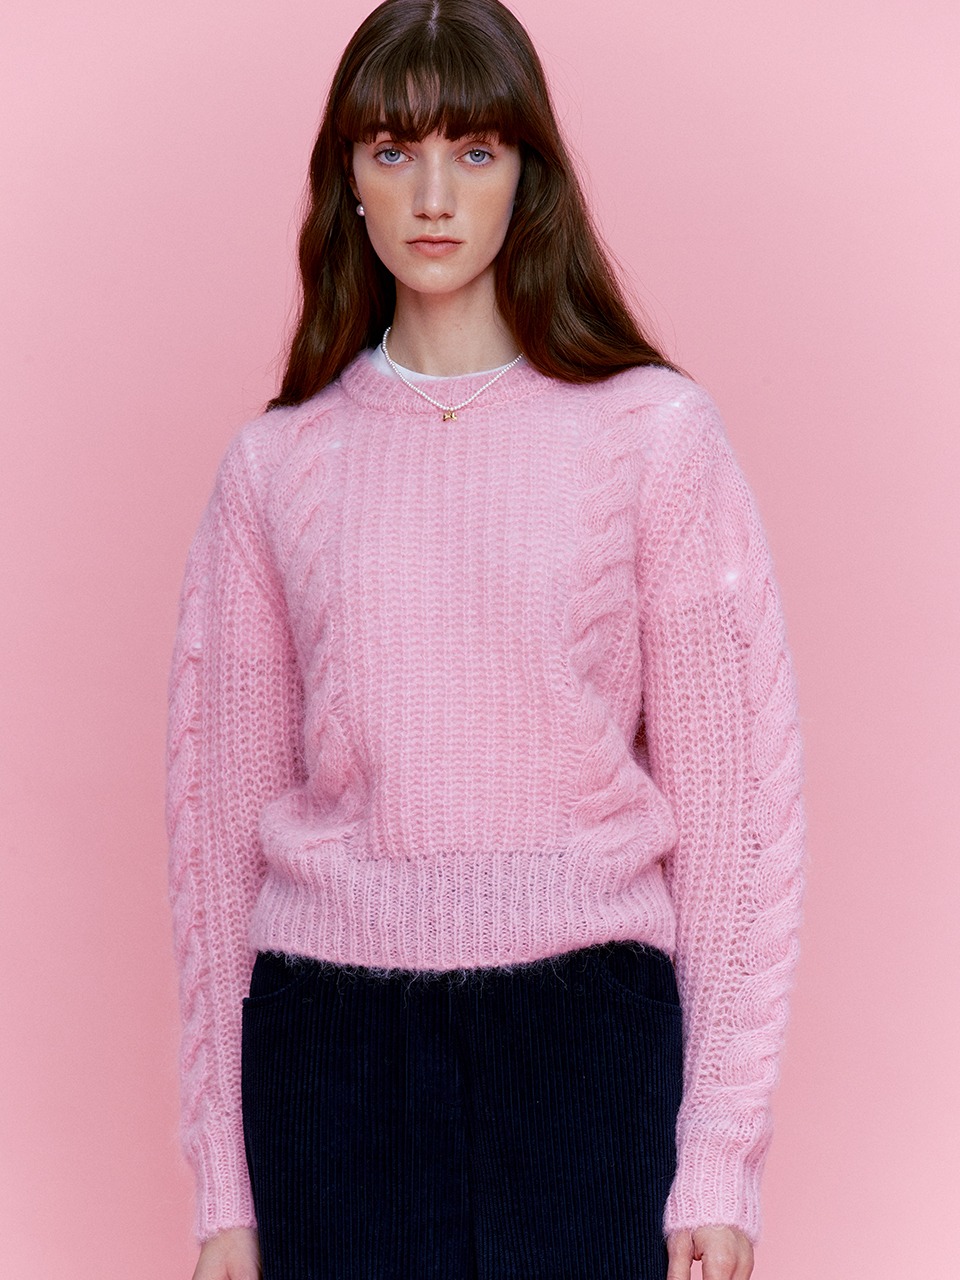 Mohair cable knit - Cherry blossom